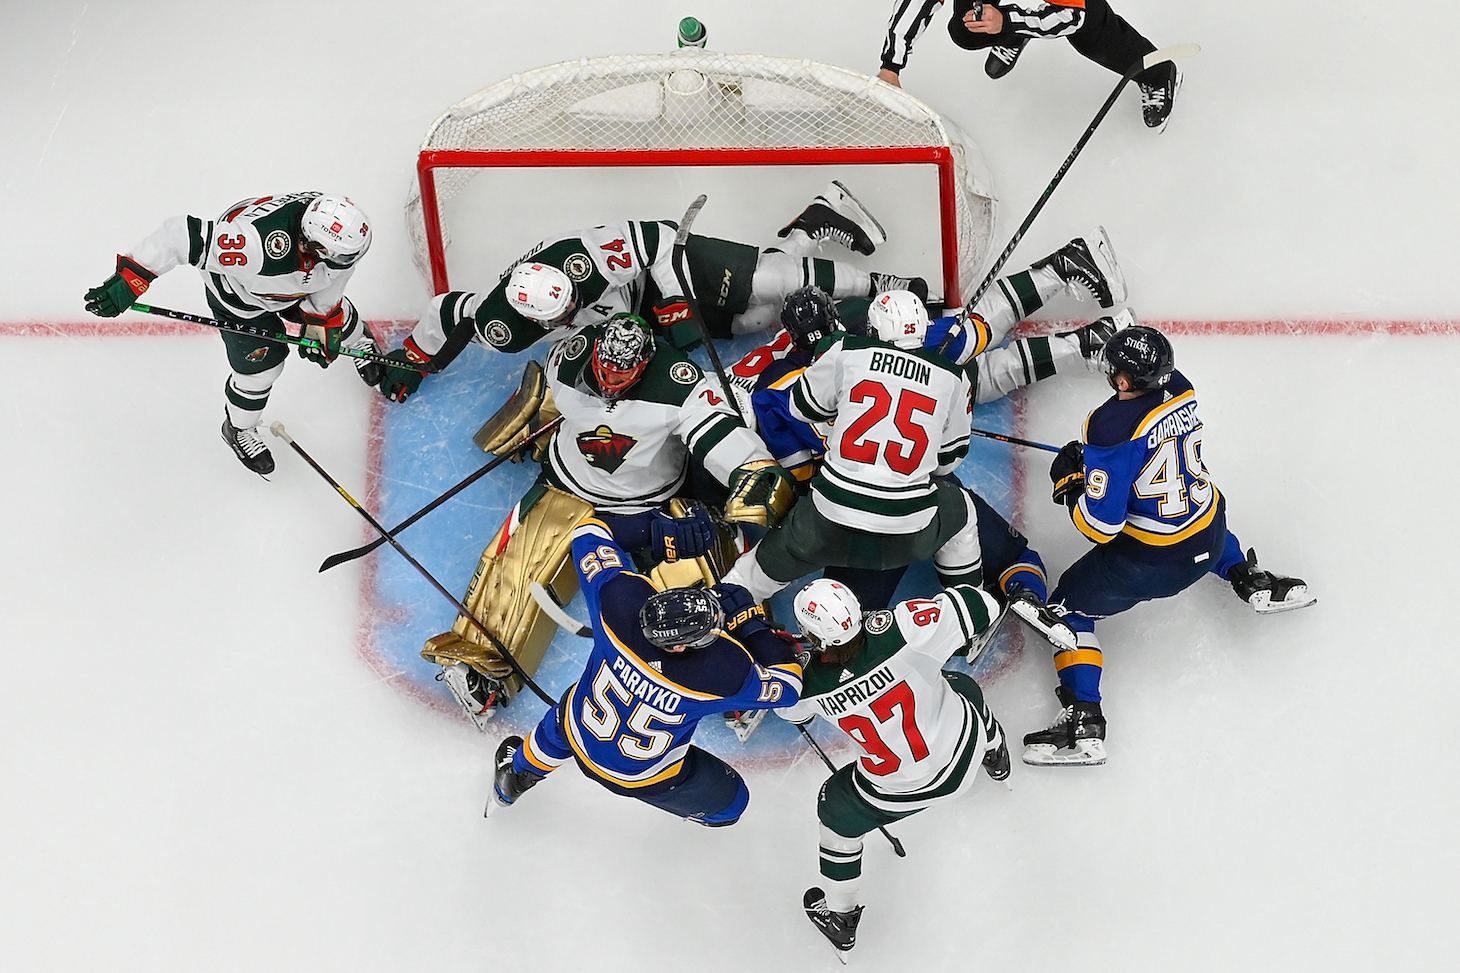 ST LOUIS, MO - MAY 08: Mats Zuccarello #36 Matt Dumba #24 Marc-Andre Fleury #29 Jonas Brodin #25 and Kirill Kaprizov #97 of the Minnesota Wild defend the net against Colton Parayko #55 Pavel Buchnevich #89 and Ivan Barbashev #49 of the St. Louis Blues in the third period of Game Four of the First Round of the 2022 Stanley Cup Playoffs at Enterprise Center on May 8, 2022 in St Louis, Missouri. (Photo by Joe Puetz/Getty Images)